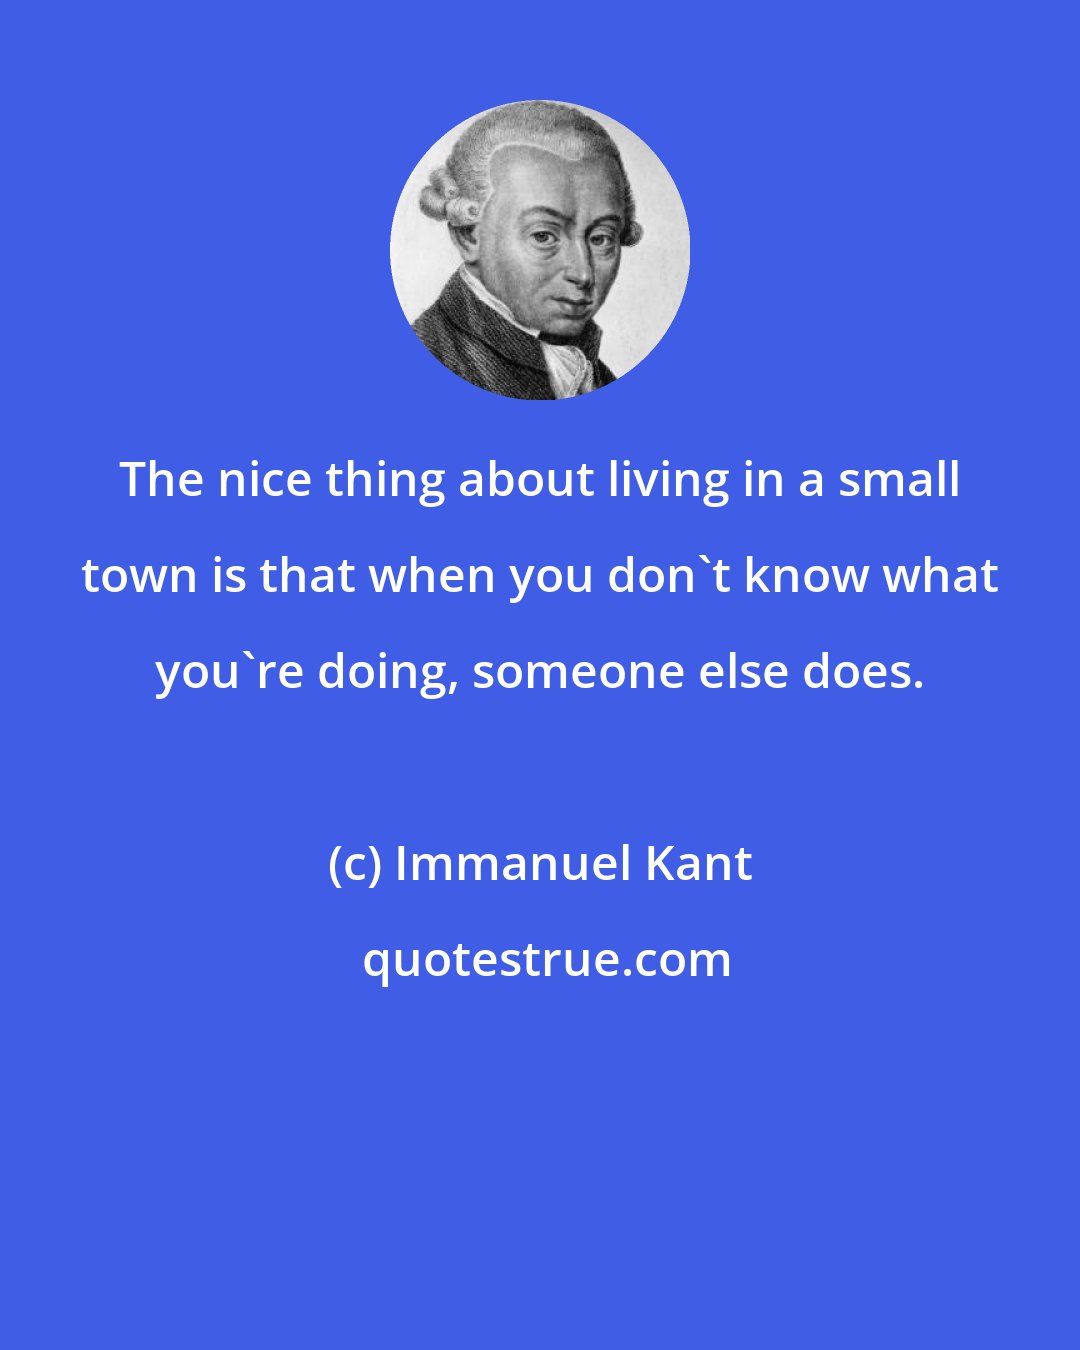 Immanuel Kant: The nice thing about living in a small town is that when you don't know what you're doing, someone else does.